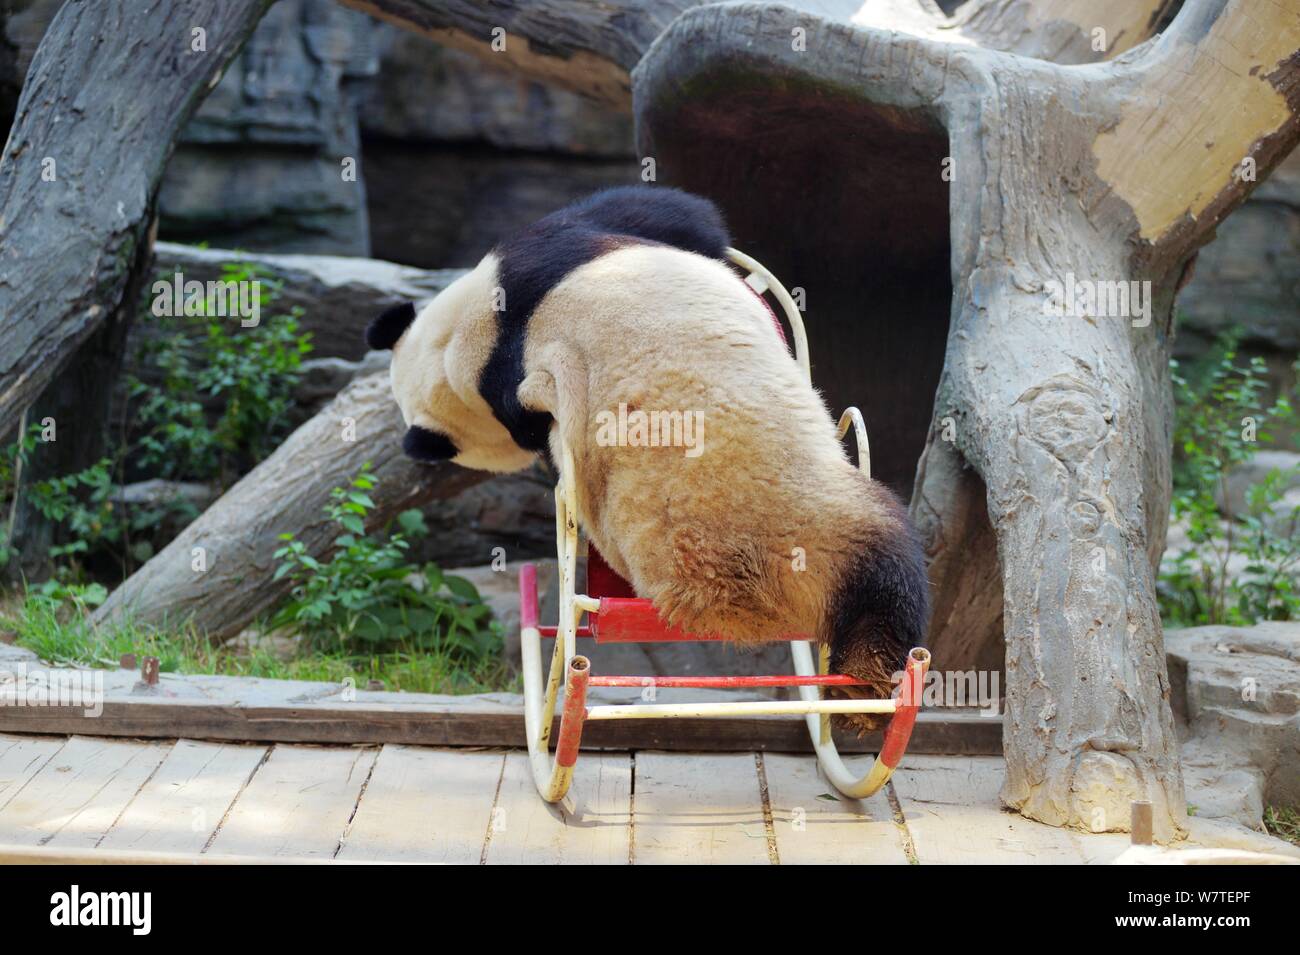 A giant panda plays on a rocking chair at Beijing Zoo in Beijing, China, 17 May 2017. Stock Photo